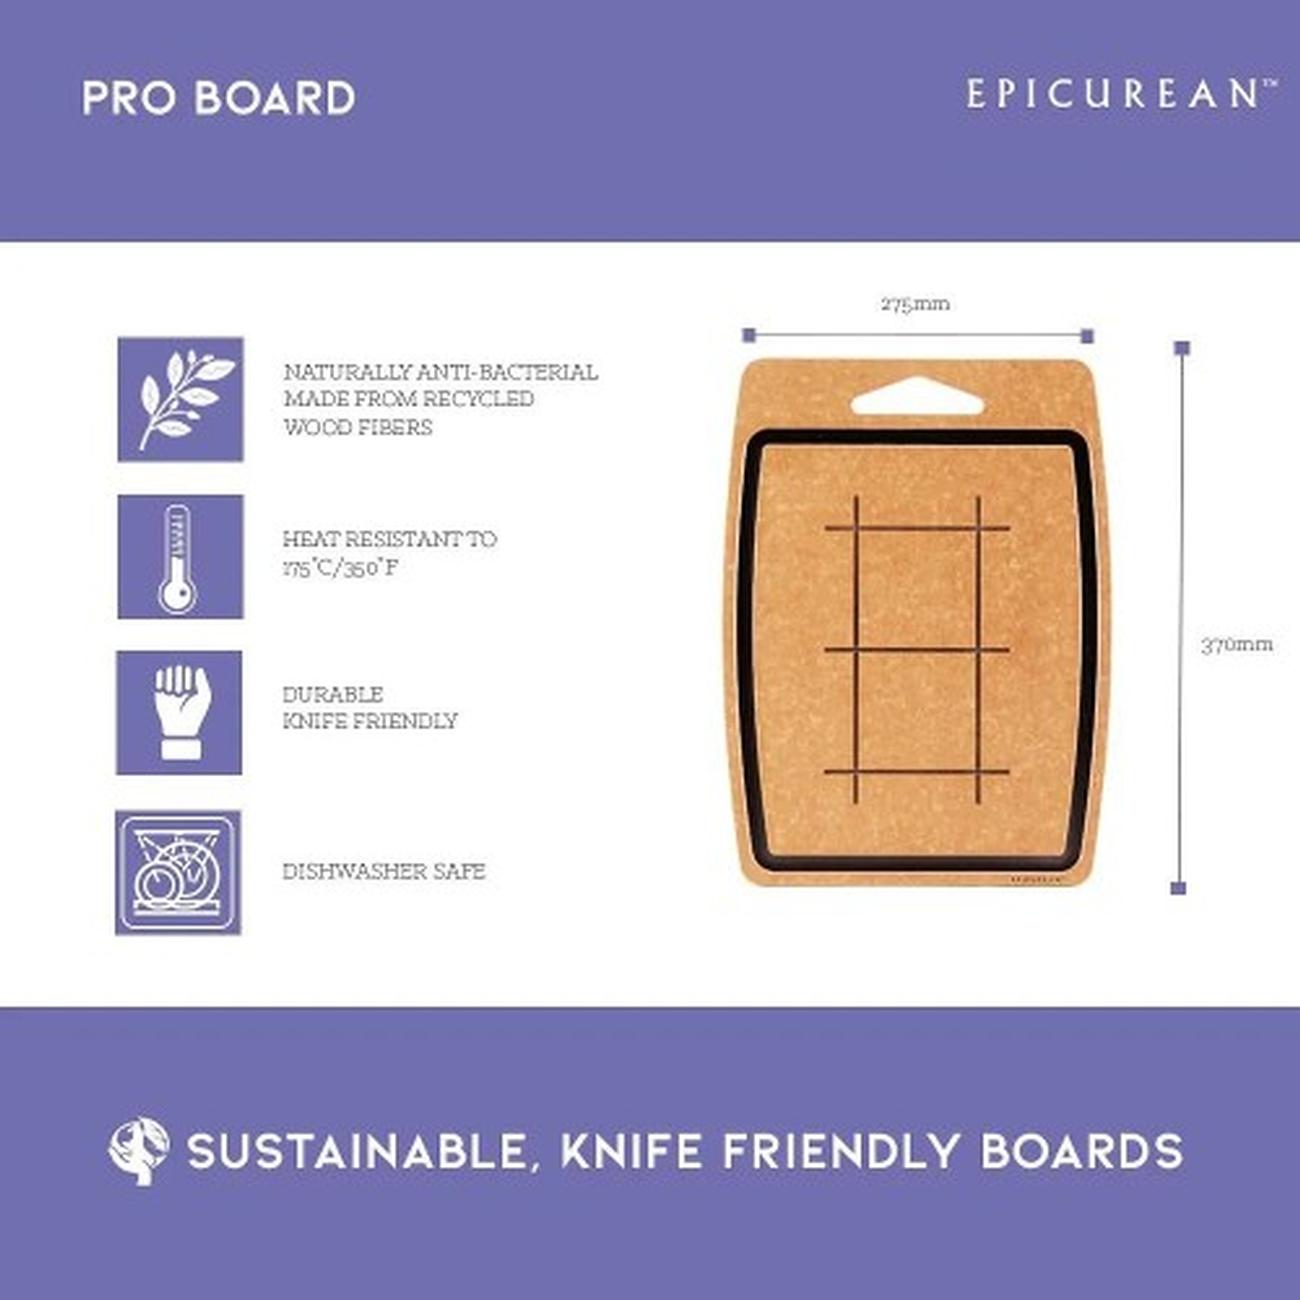 epicurean-pro-carving-board-with-groove-370x275mm - Epicurean Pro Carving Board with Groove 37x27.5cm